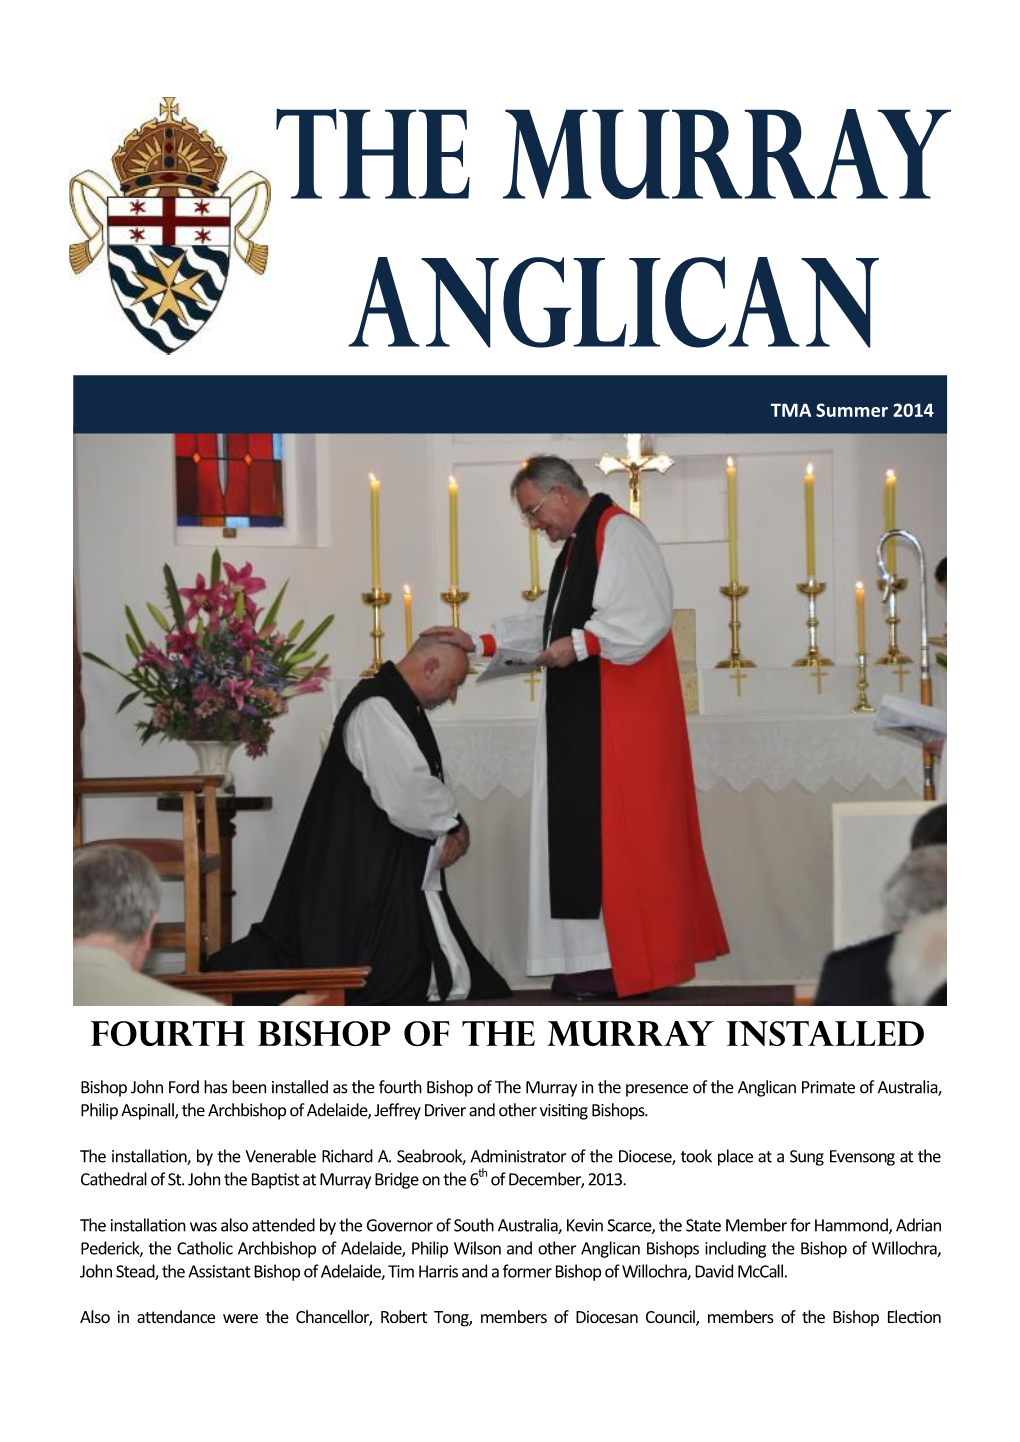 Fourth Bishop of the Murray Installed